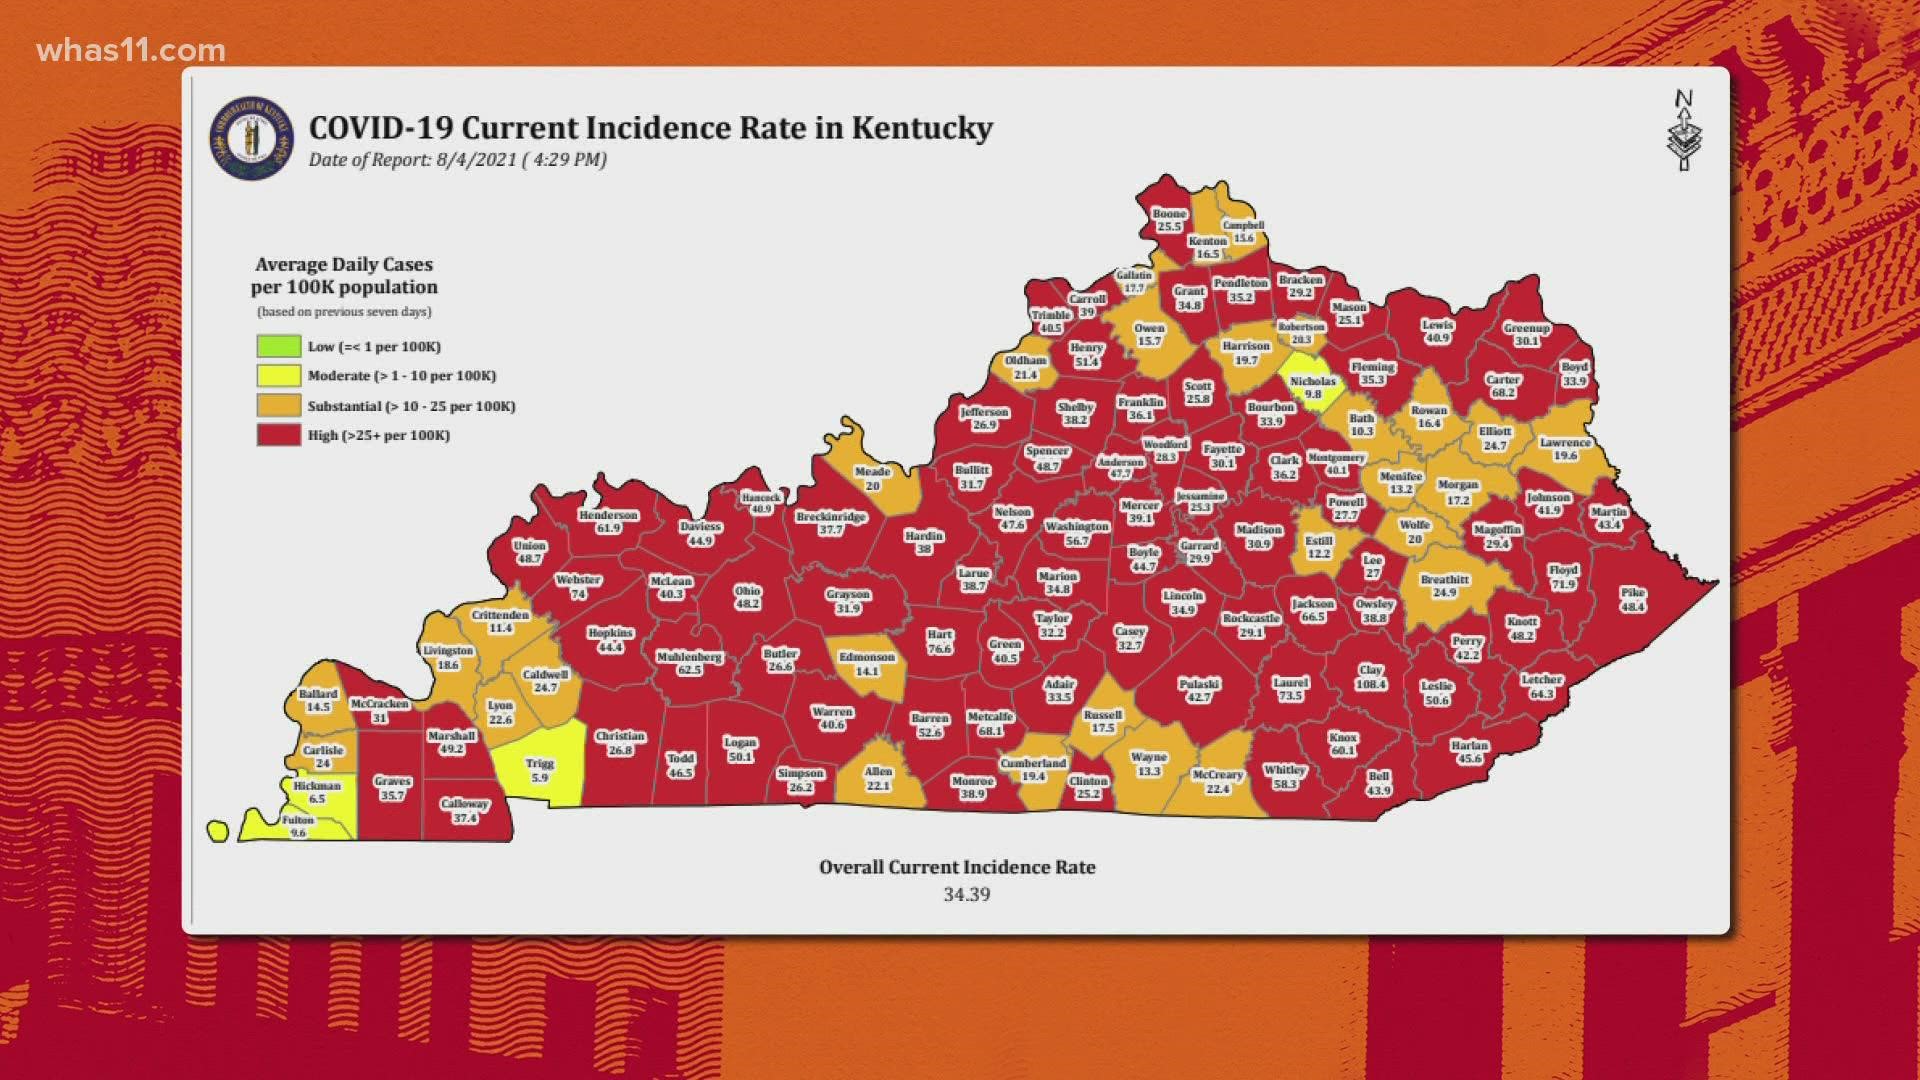 Most counties in Kentucky and Indiana are classified in the orange or red zone, meaning substantial or high community transmission.